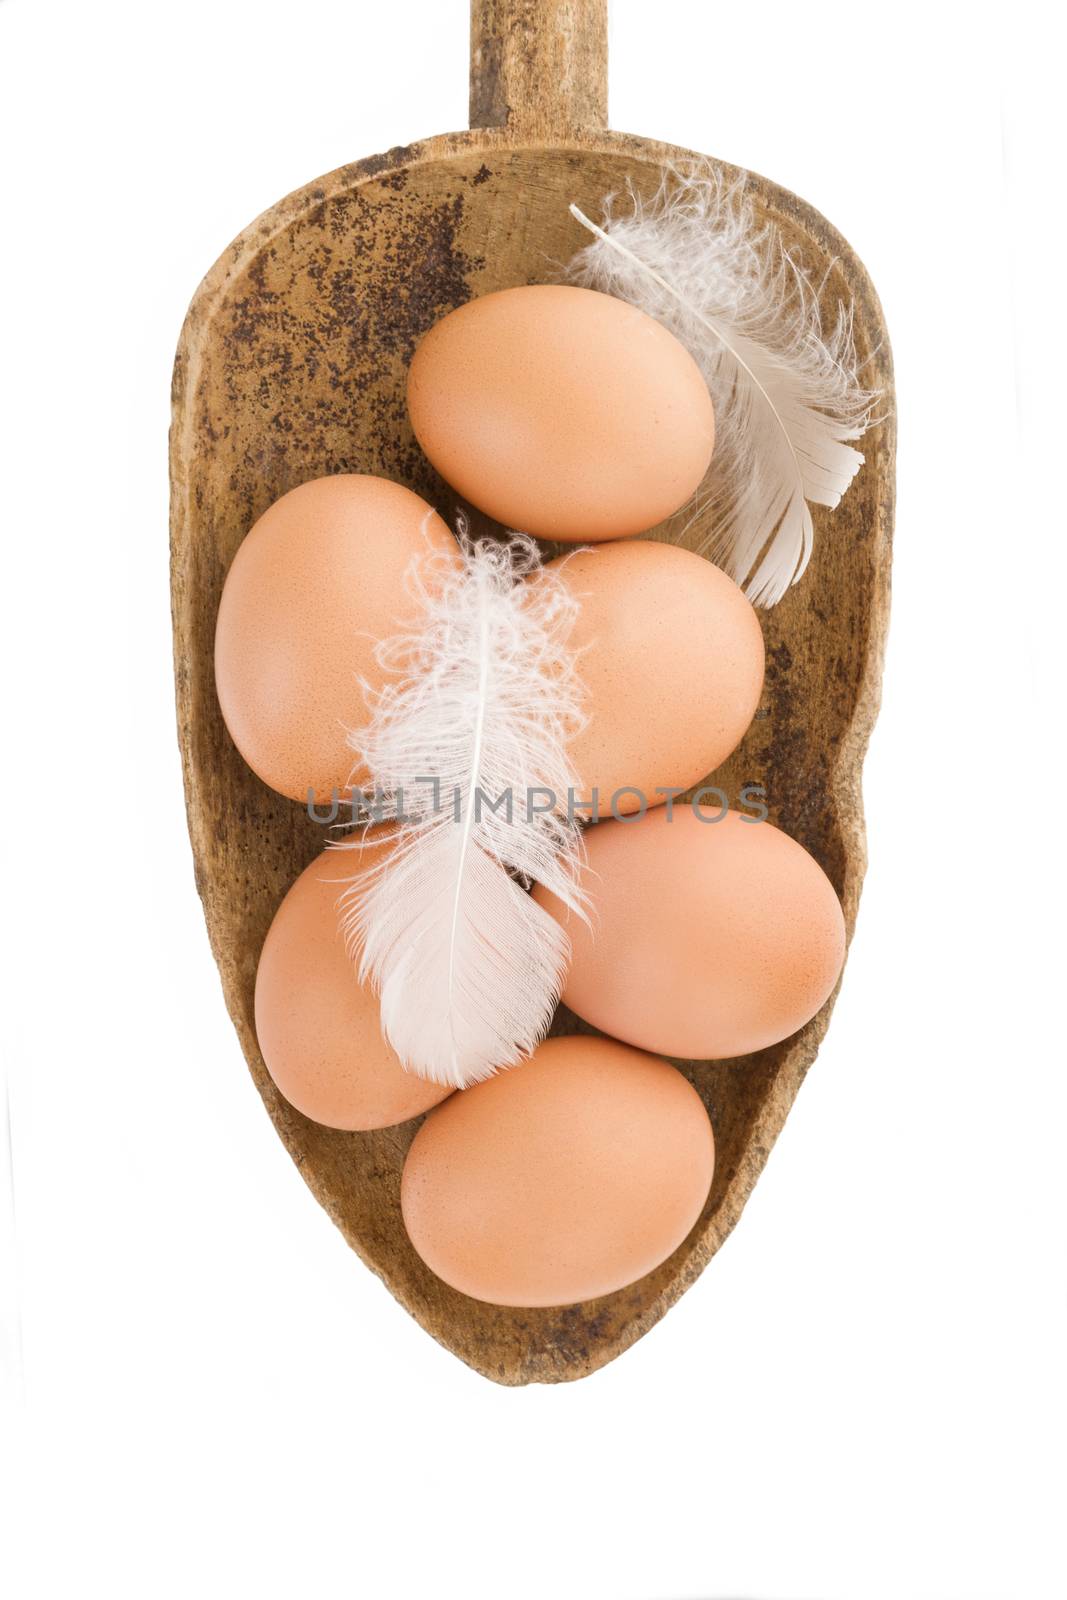 Fresh organic natural brown eggs on wooden spoon isolated on white background. Fresh modern image language. Culinary arts. 